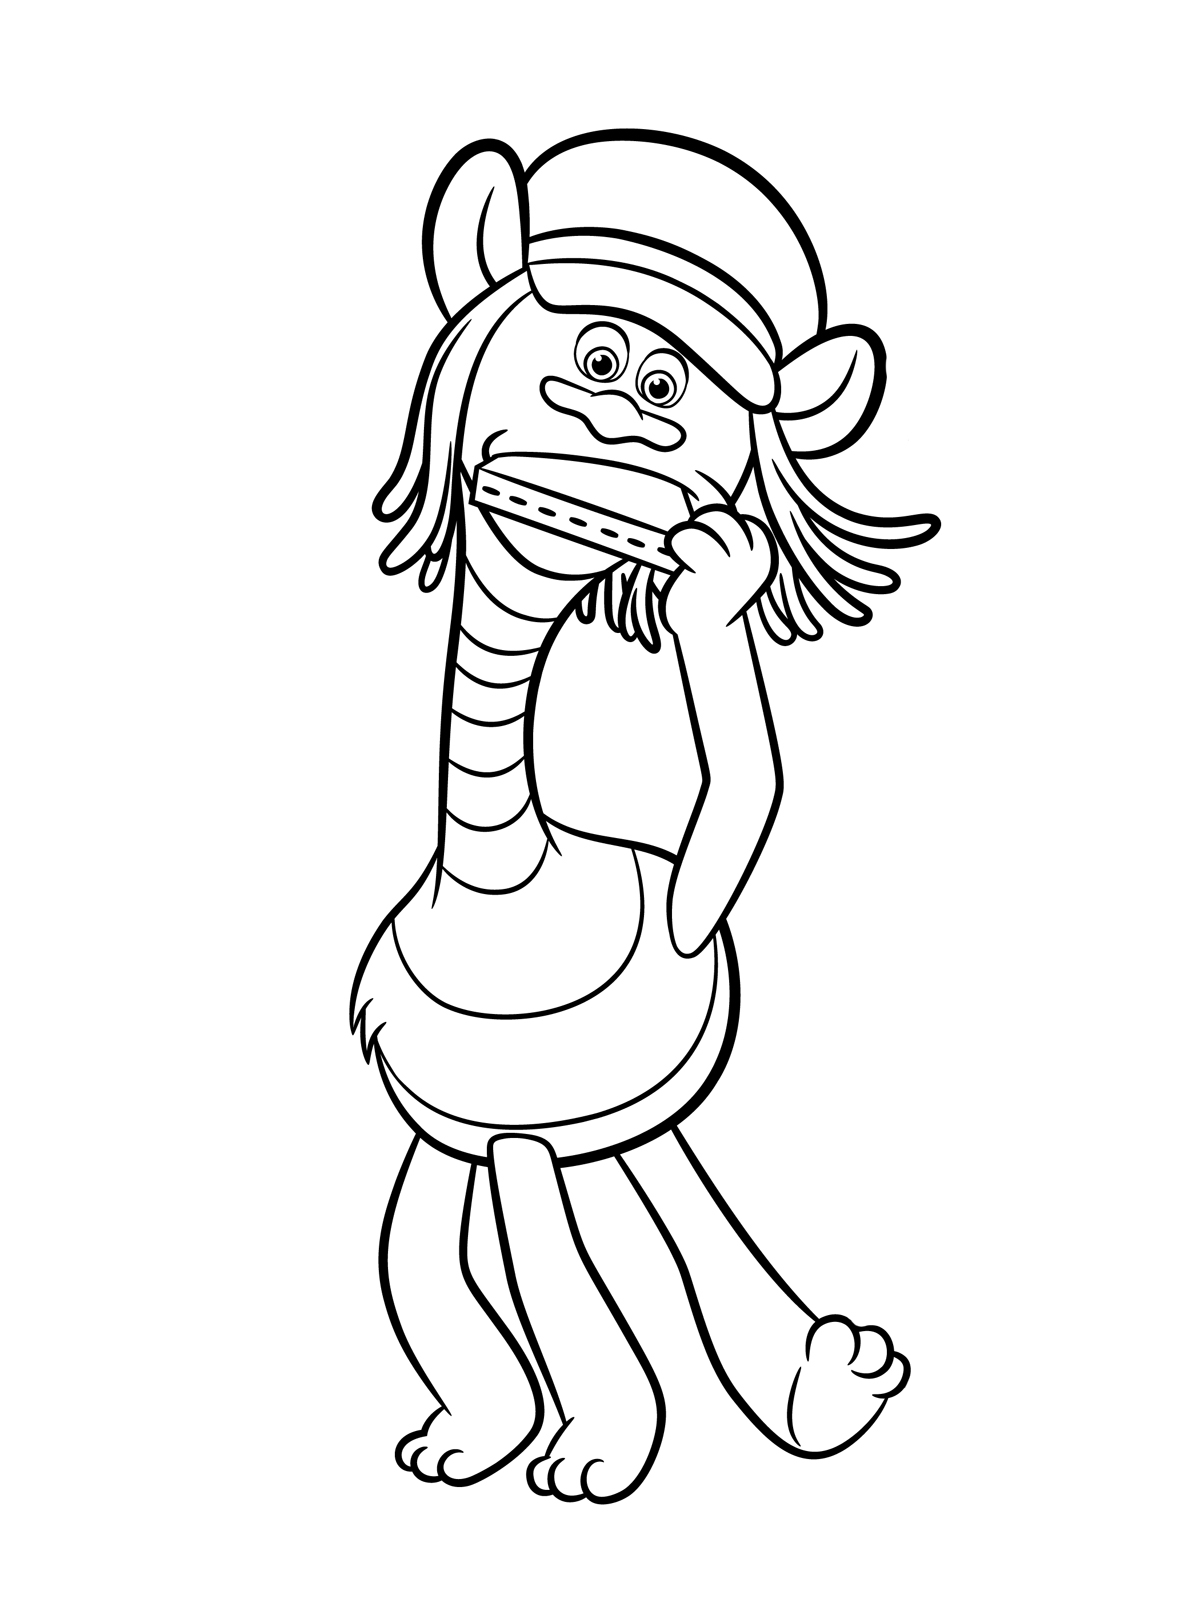 Trolls Coloring Pages - Cooper